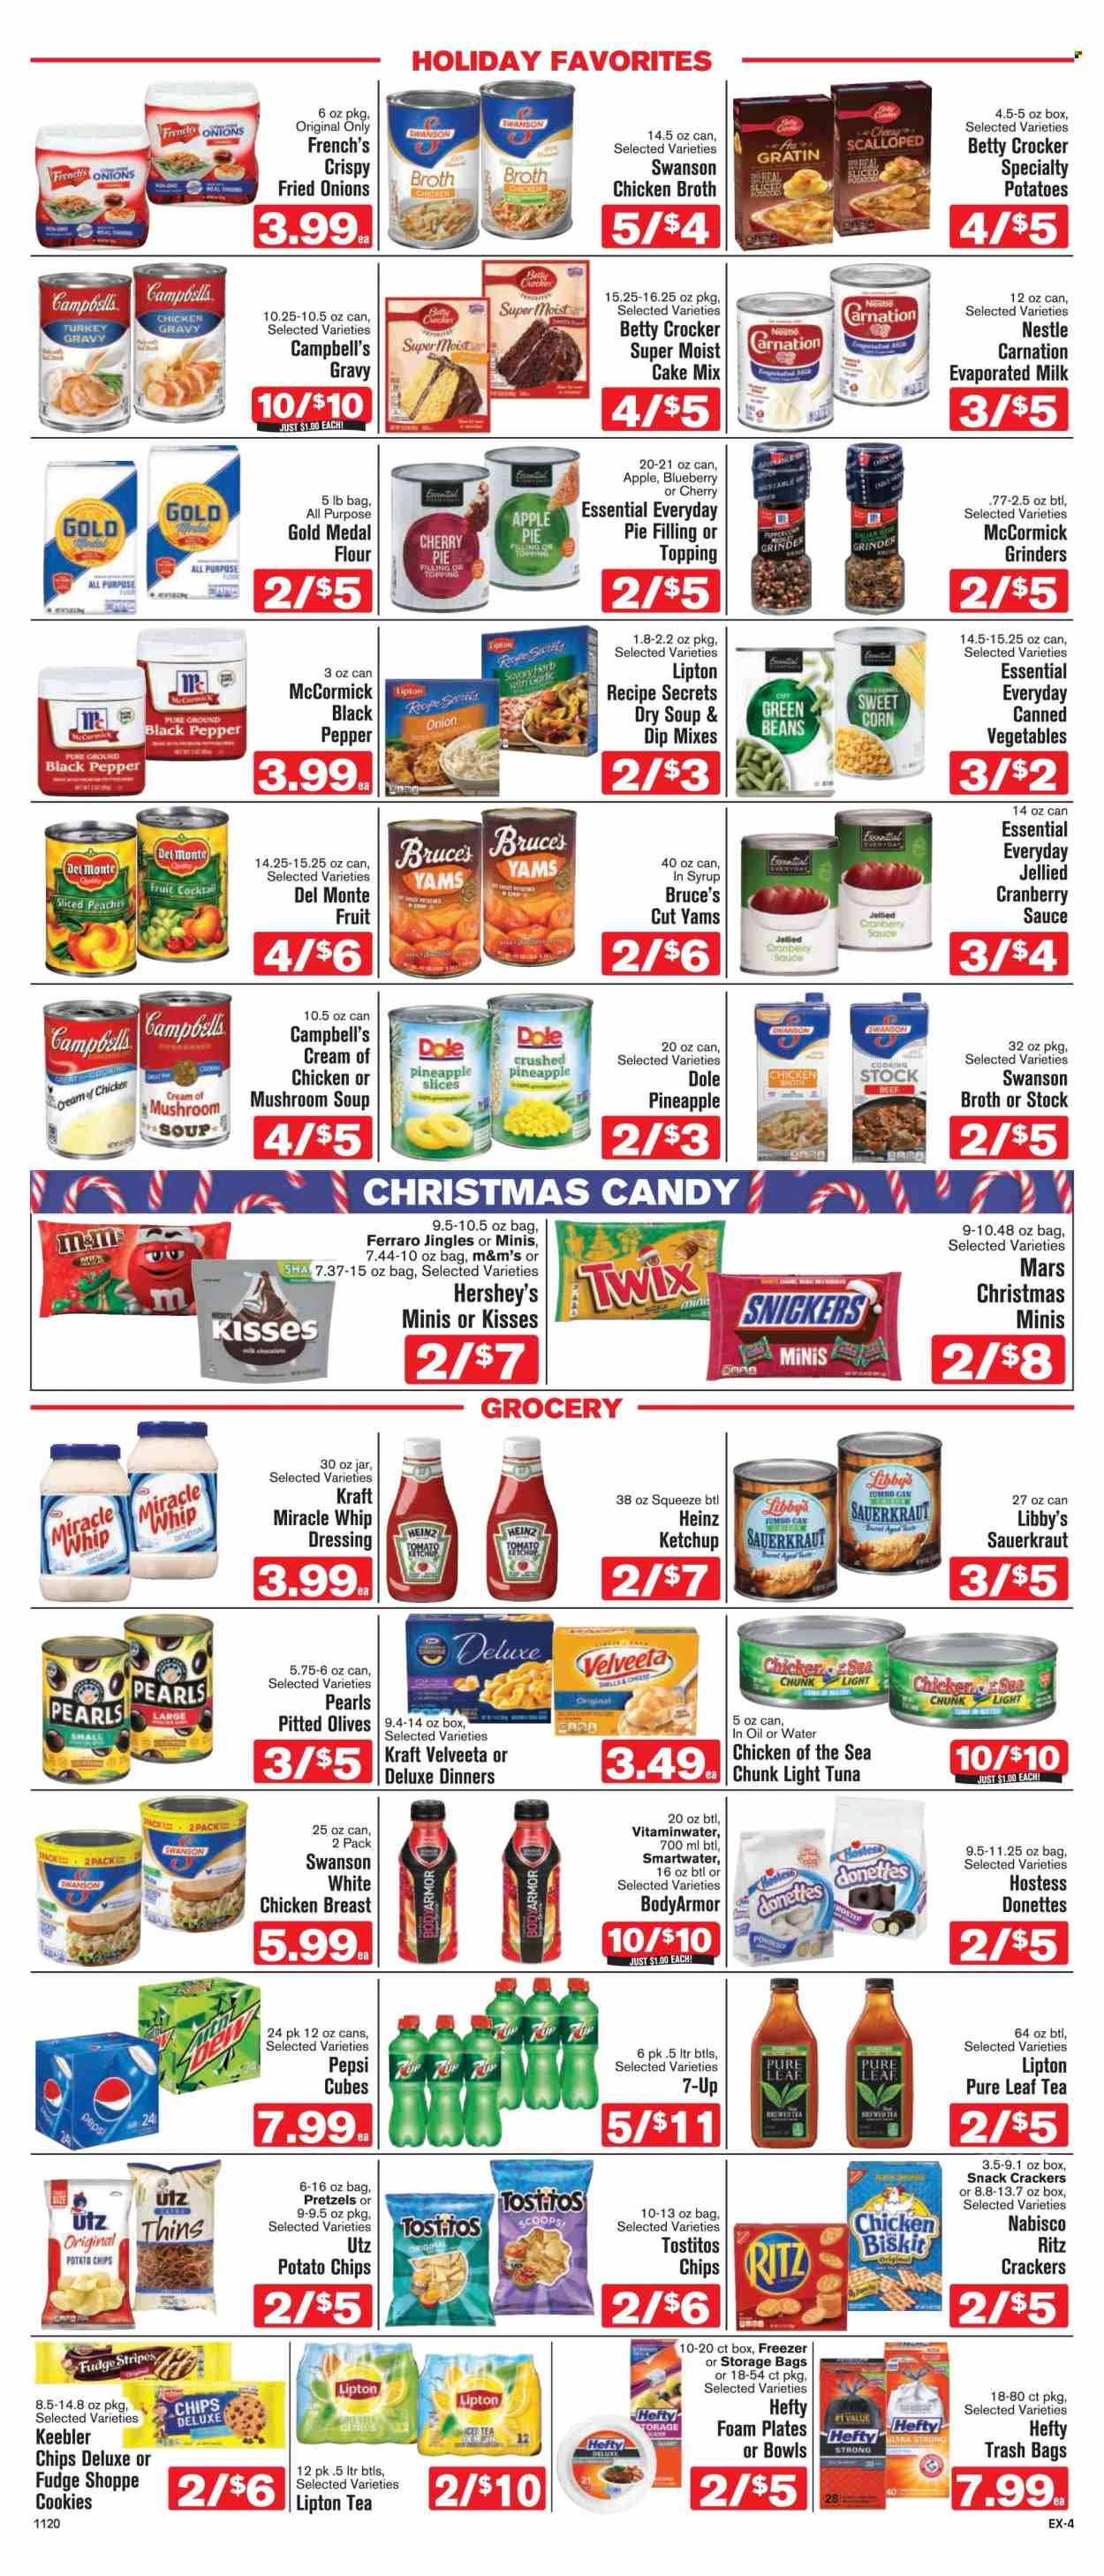 thumbnail - Shop ‘n Save Express Flyer - 11/20/2021 - 11/26/2021 - Sales products - pretzels, apple pie, cake mix, beans, corn, garlic, green beans, Dole, pineapple, chicken breasts, tuna, Campbell's, mushroom soup, soup, sauce, Kraft®, evaporated milk, Miracle Whip, Hershey's, cookies, fudge, Nestlé, snack, Snickers, Twix, Mars, M&M's, crackers, Keebler, RITZ, potato chips, chips, Thins, Tostitos, flour, pie filling, chicken broth, topping, broth, sauerkraut, Heinz, olives, canned vegetables, light tuna, Chicken of the Sea, turkey gravy, ketchup, dressing, cranberry sauce, Pepsi, Lipton, ice tea, 7UP, Smartwater, Pure Leaf, peaches. Page 4.